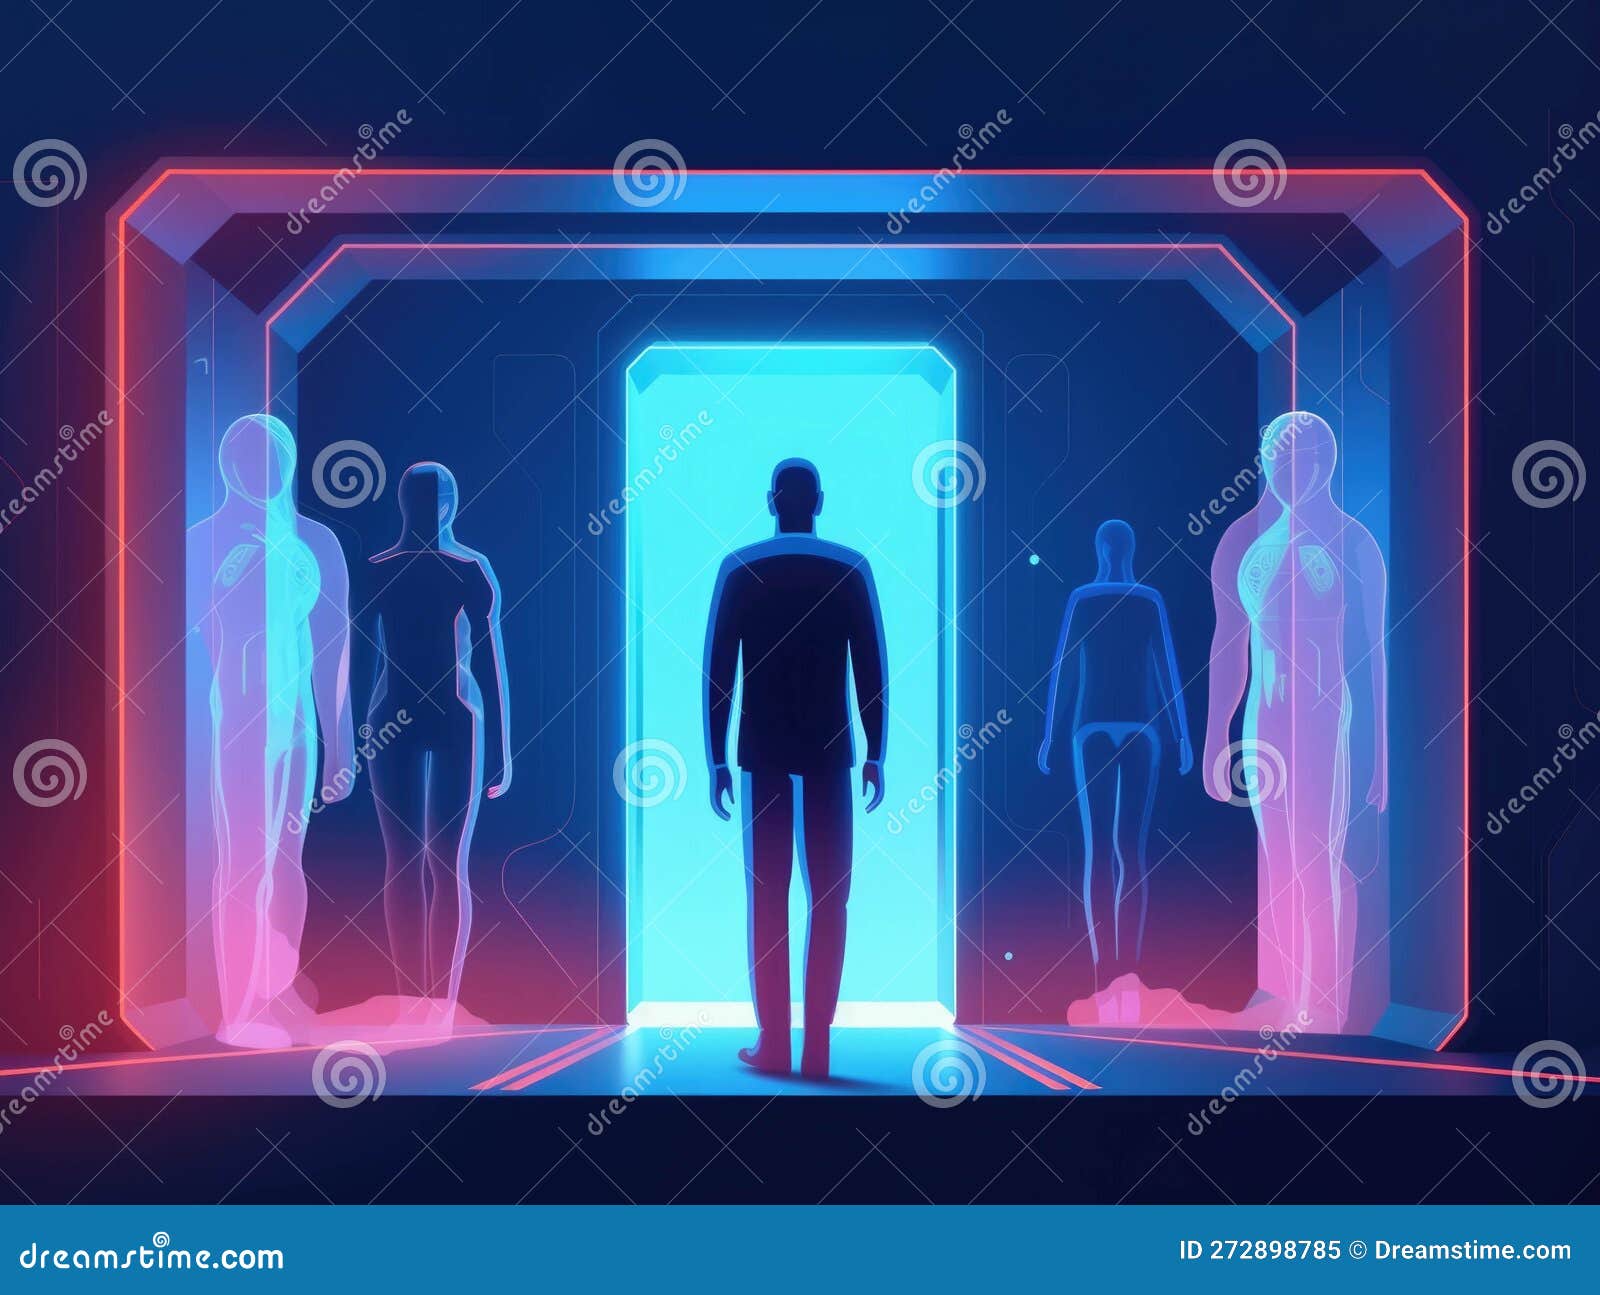 are we walking blindly into the unknown with ondemand body scanners and ai . ai generation